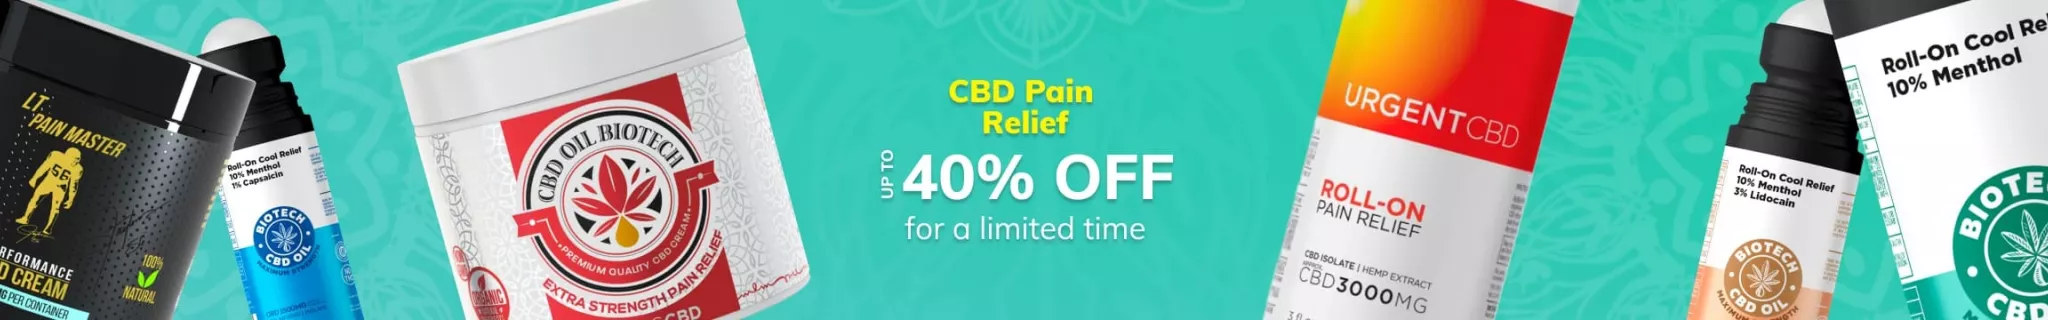 CBD Pain Relief up to 40% OFF